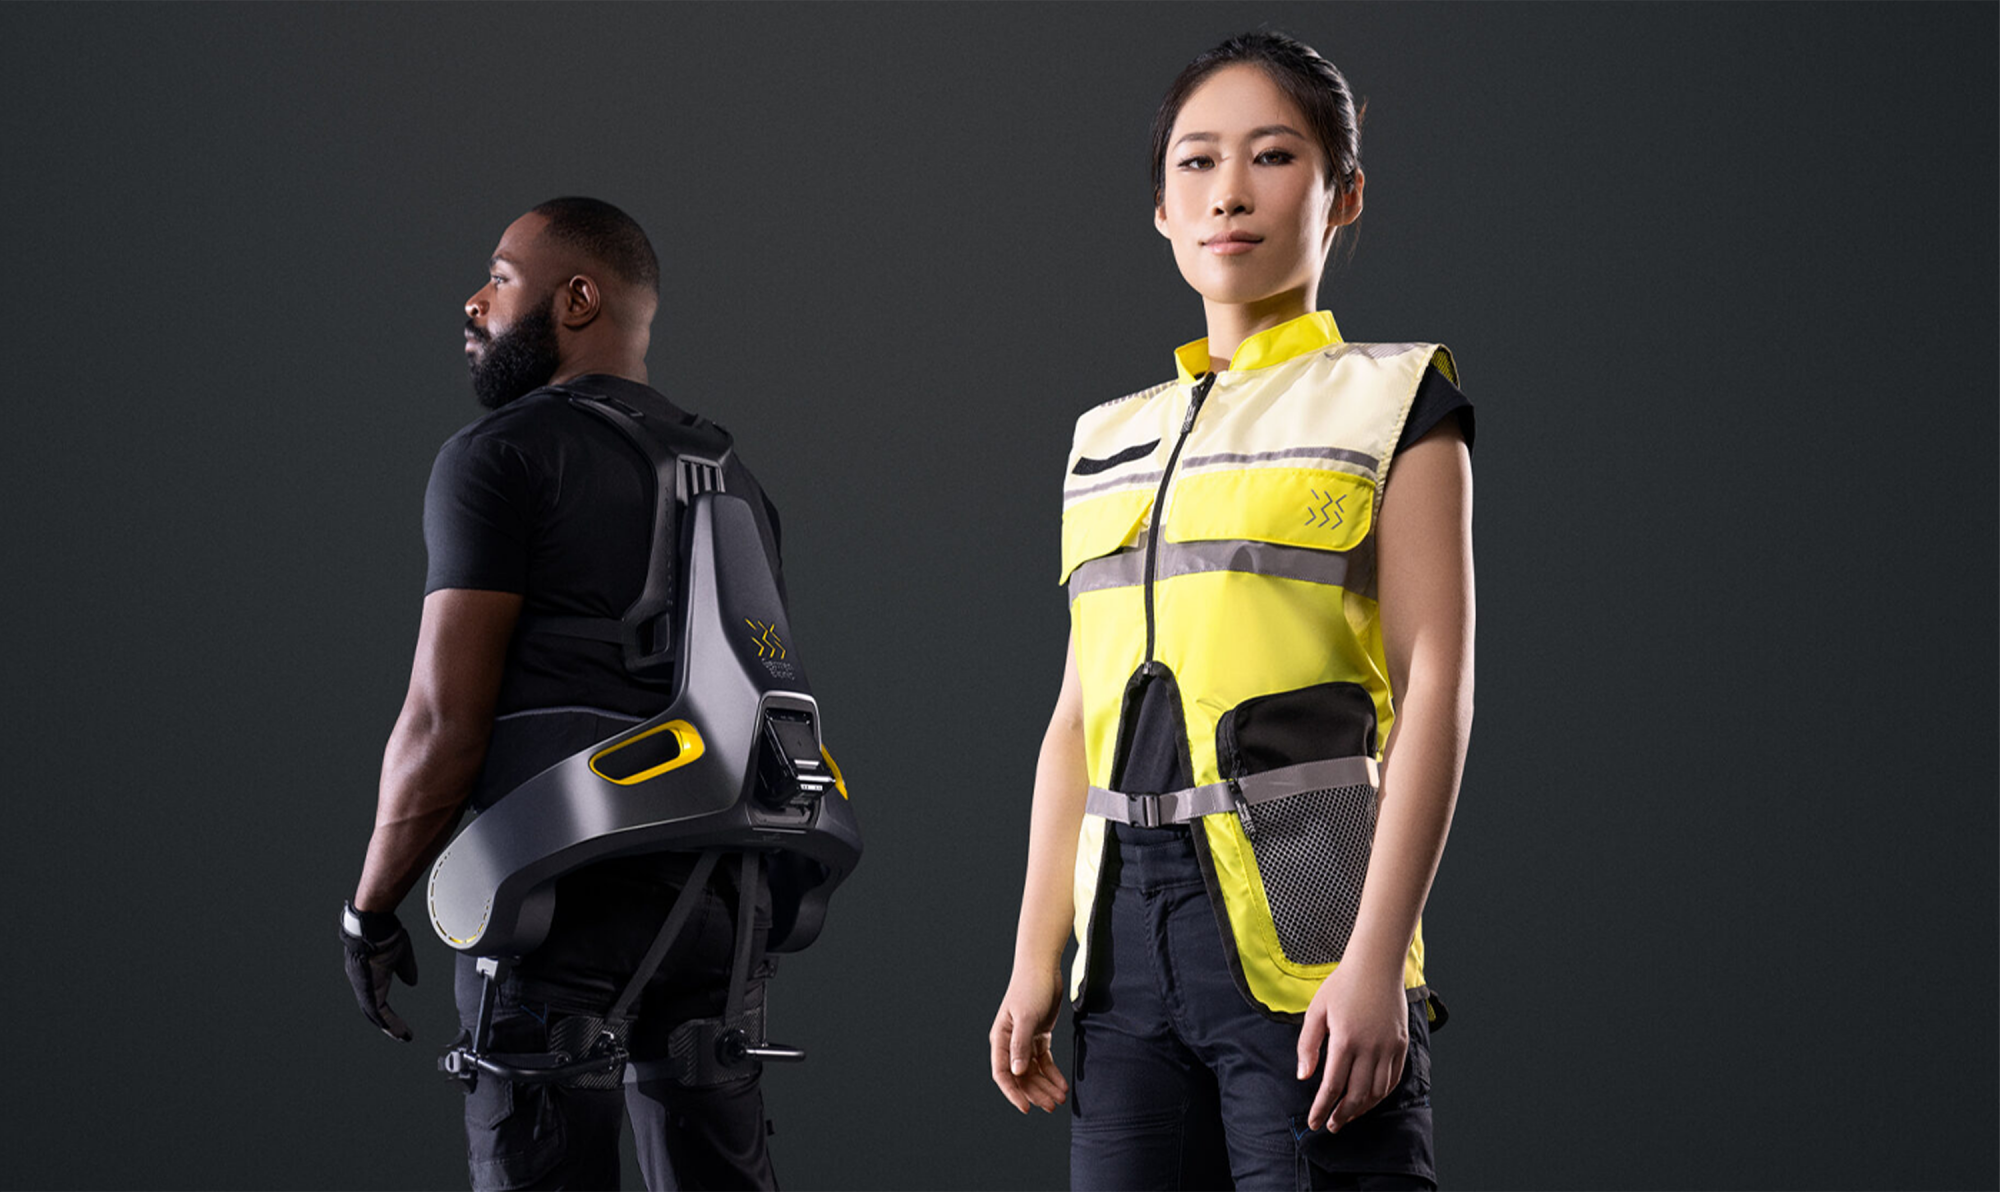 man-in-back-wears-the-apogee-exoskeleton-and-woman-in-front-wears-the-safetywest